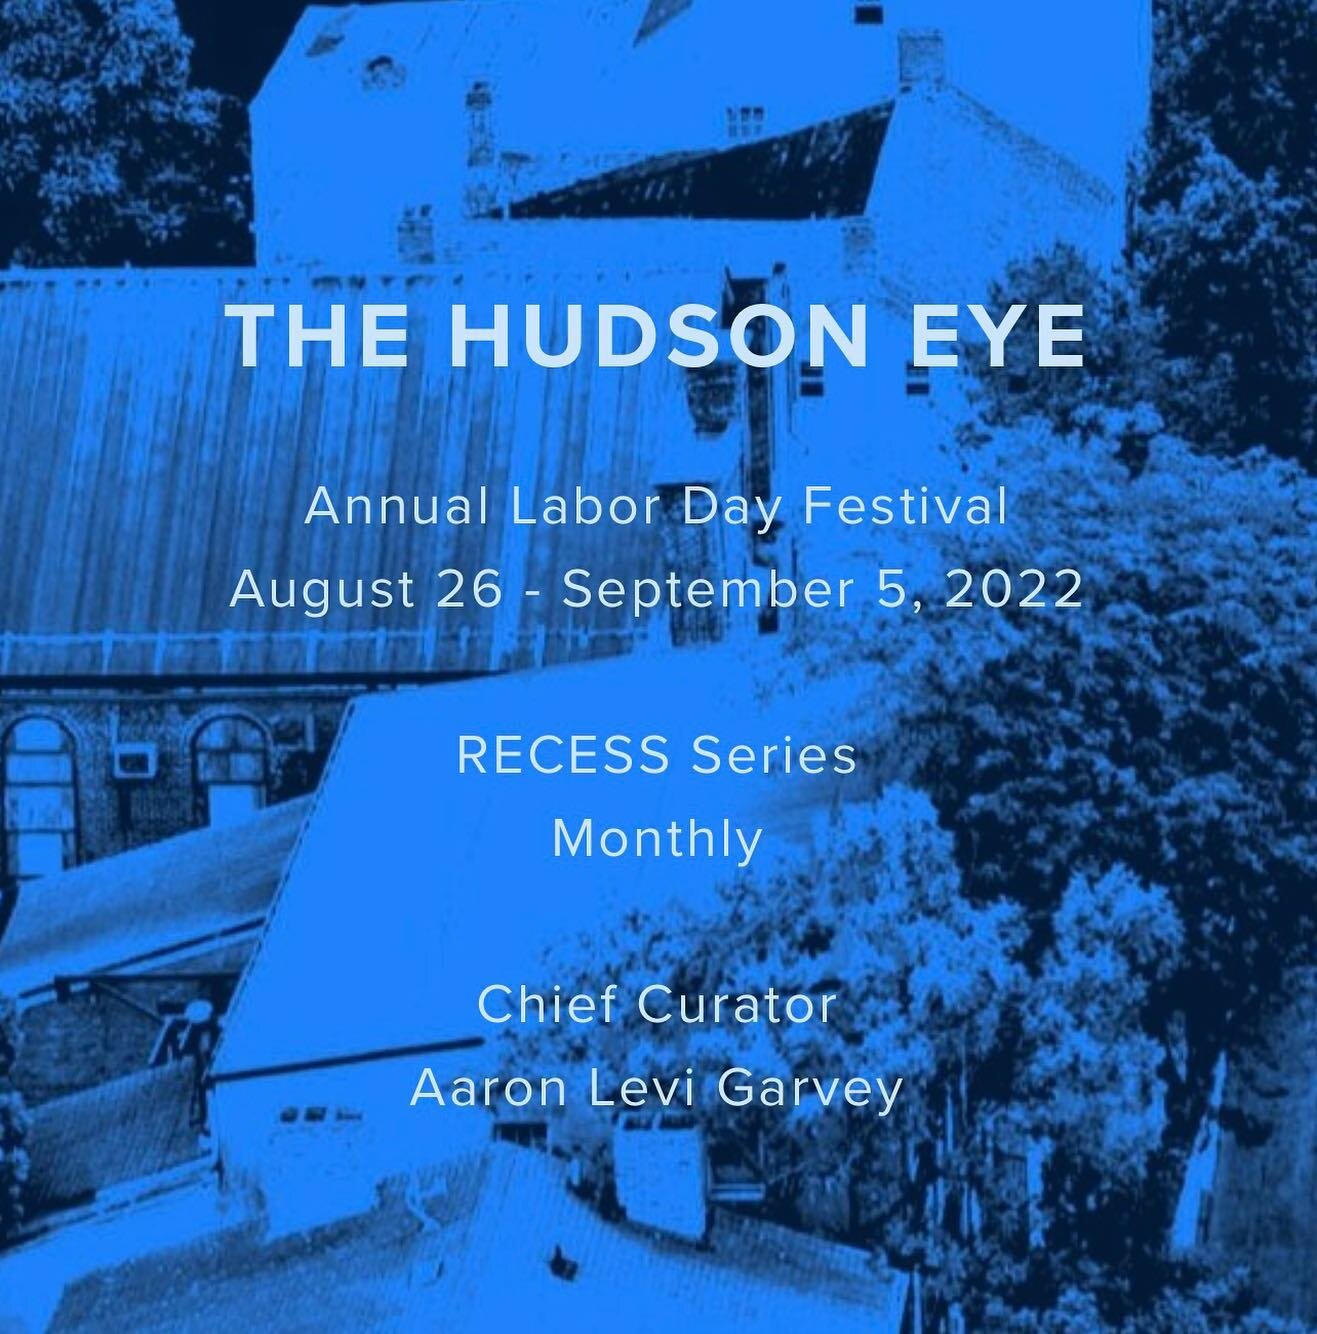 ELEVATED MATTER GALLERY is pleased to open an exhibition of paintings, collage and wood sculpture by Joseph La Piana as part of the 2022 Hudson Eye Festival. The solo show, titled PHOTONASTIC,  will run from Aug 26 through Sept 16.  Please DM for mor